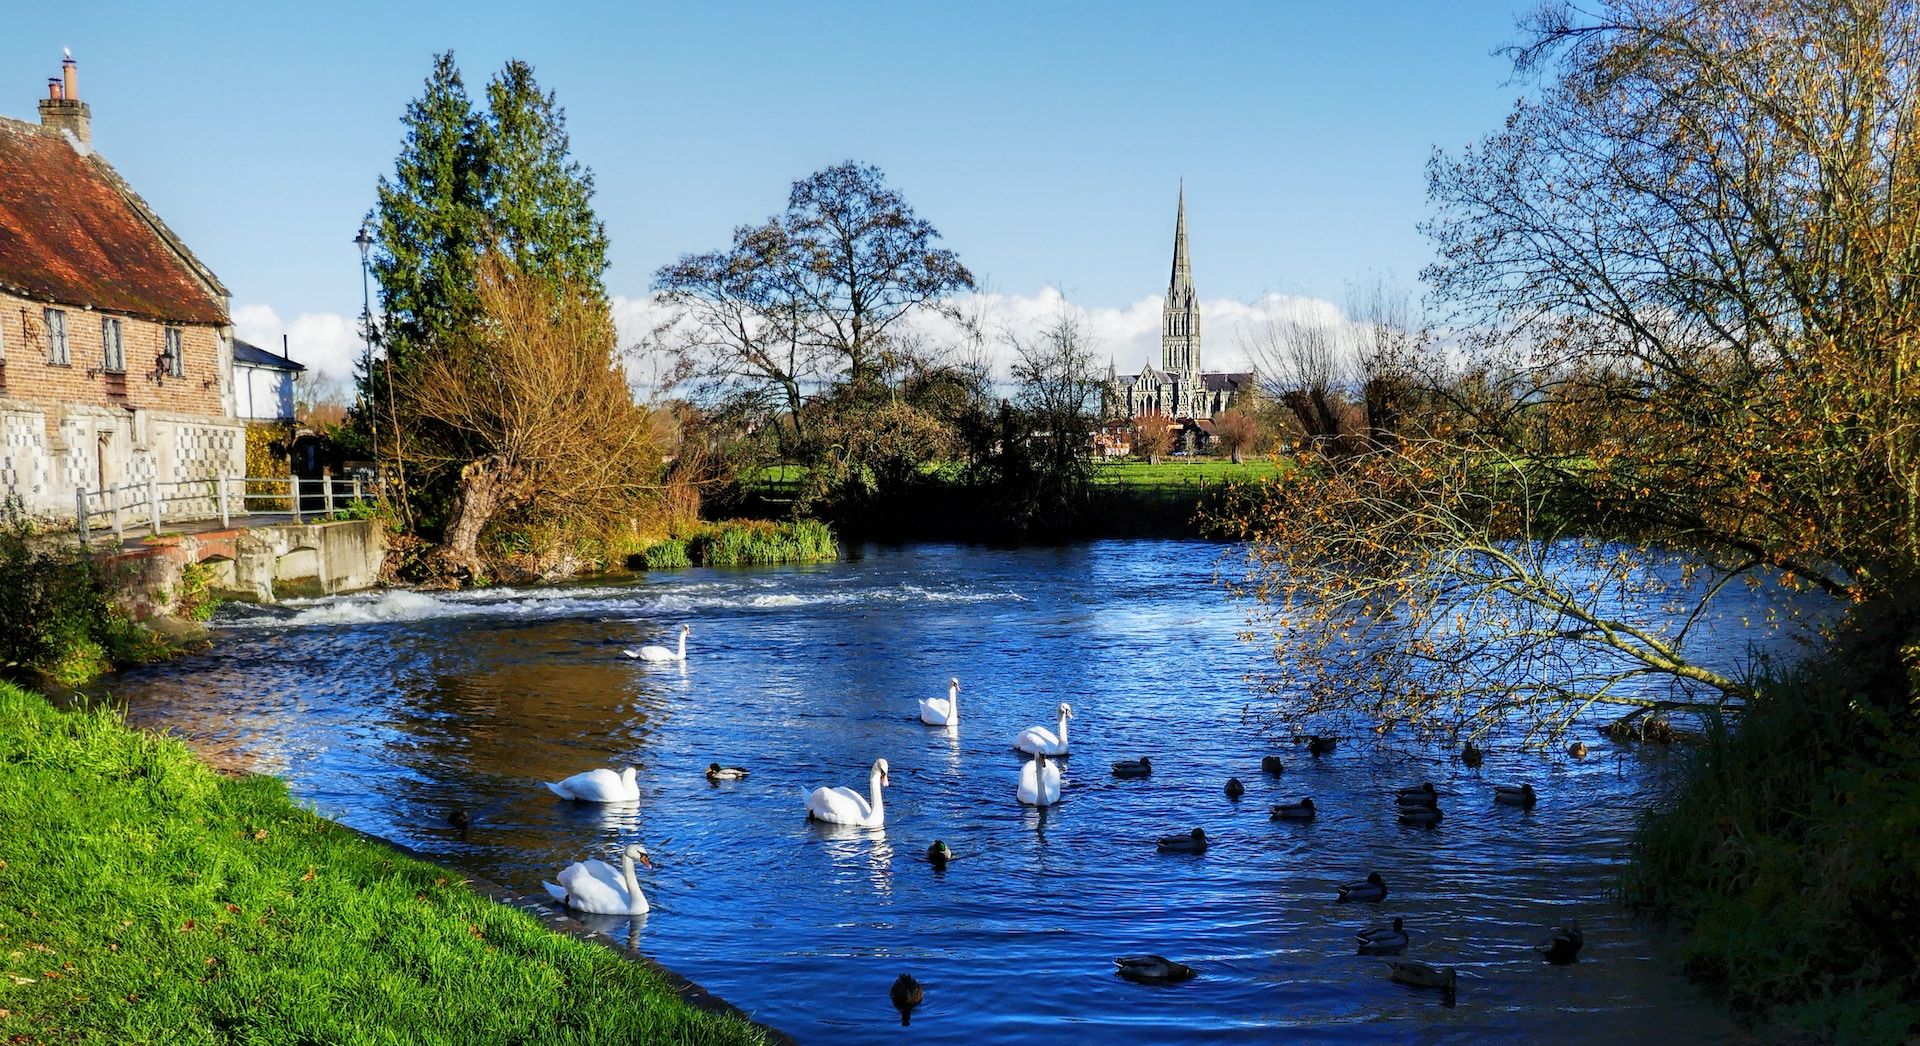 A pond with swans in front of the Salisbury Cathedral